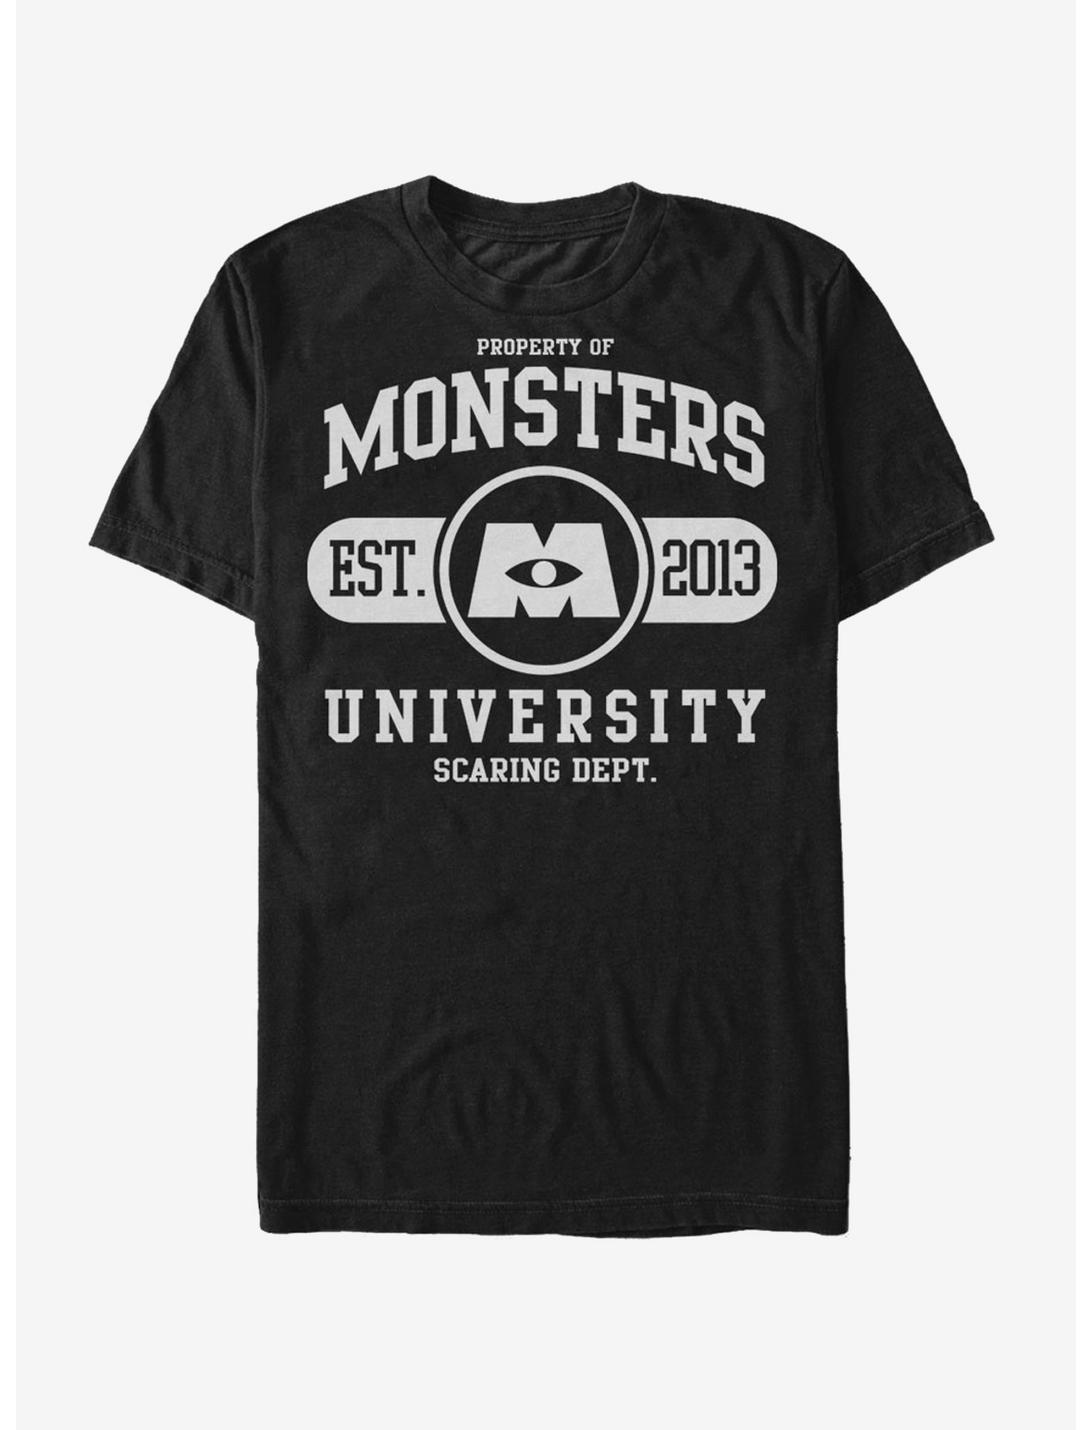 Monsters Inc. Property of Scaring Department T-Shirt, BLACK, hi-res